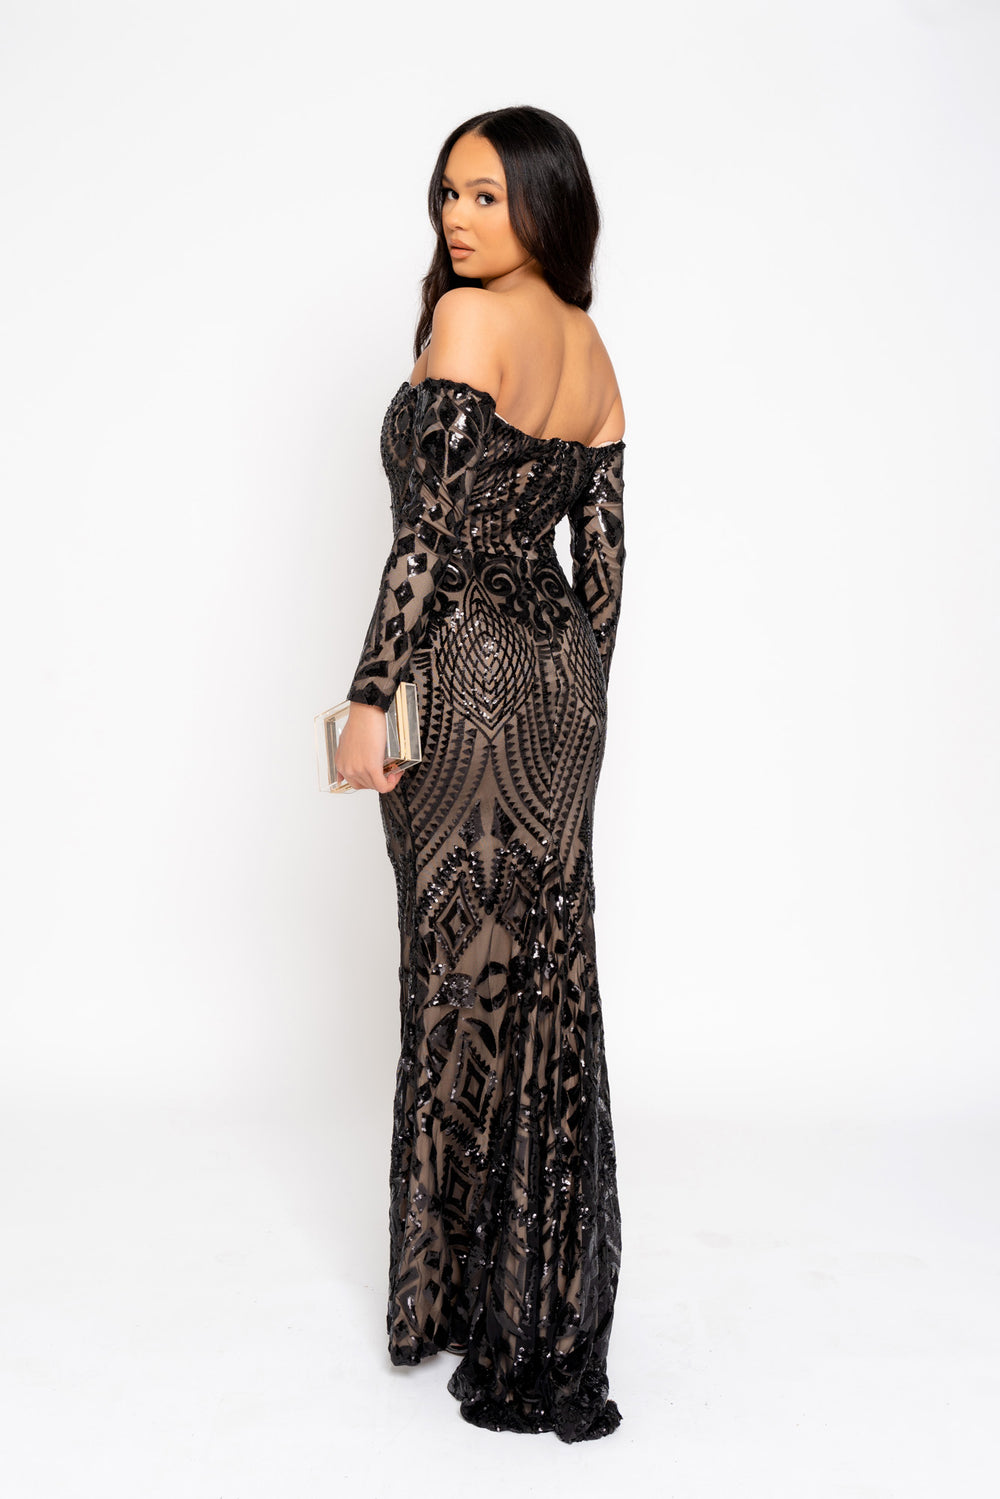 Ophelia Black Luxe Embellished Sequin Sweetheart Off Shoulder Long Sleeve Maxi Fishtail Dress